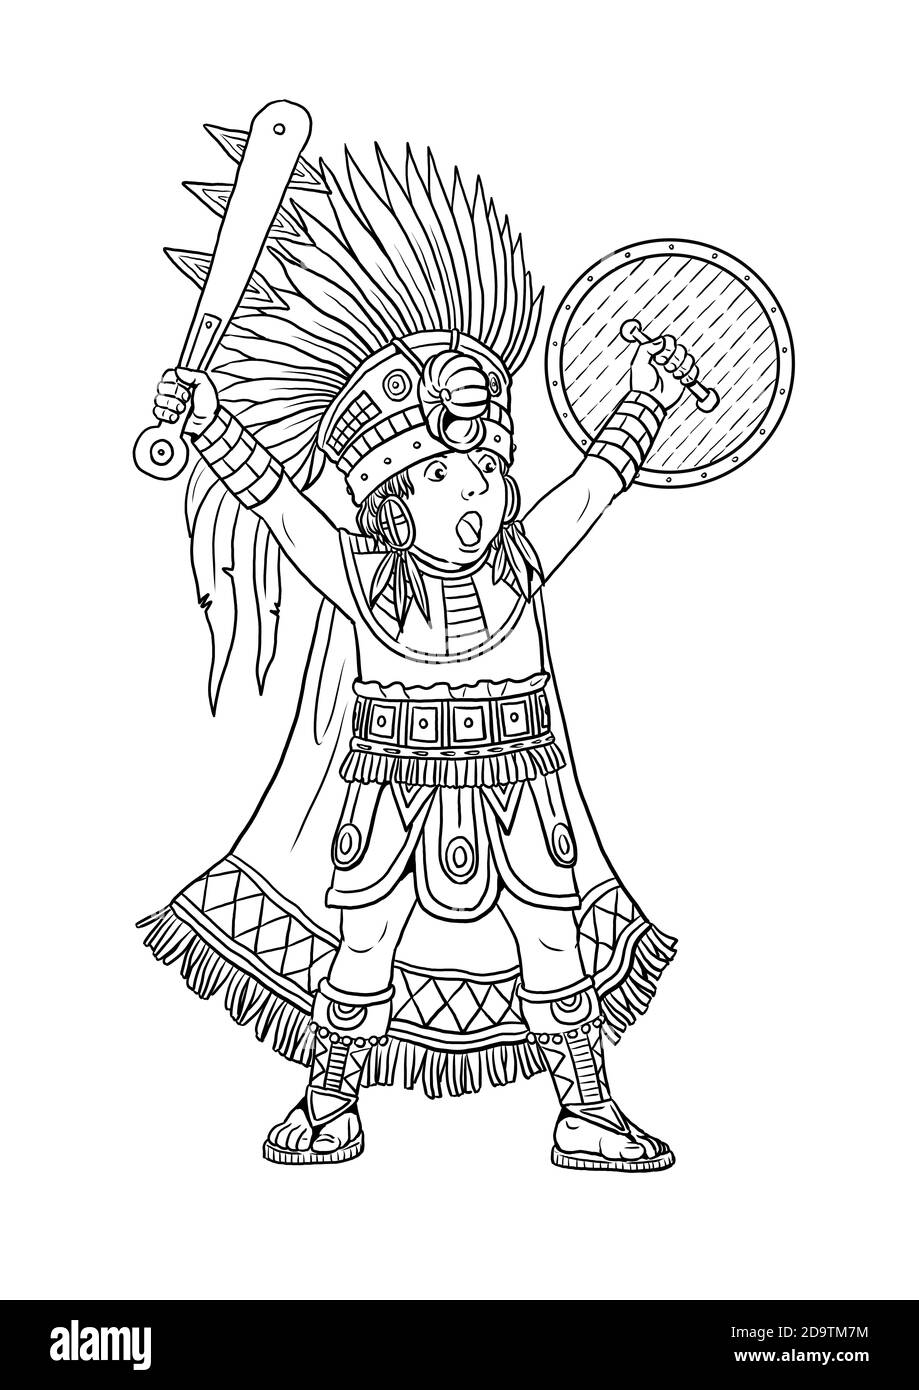 Indian maya chief for coloring. Colouring template for children. Stock Photo